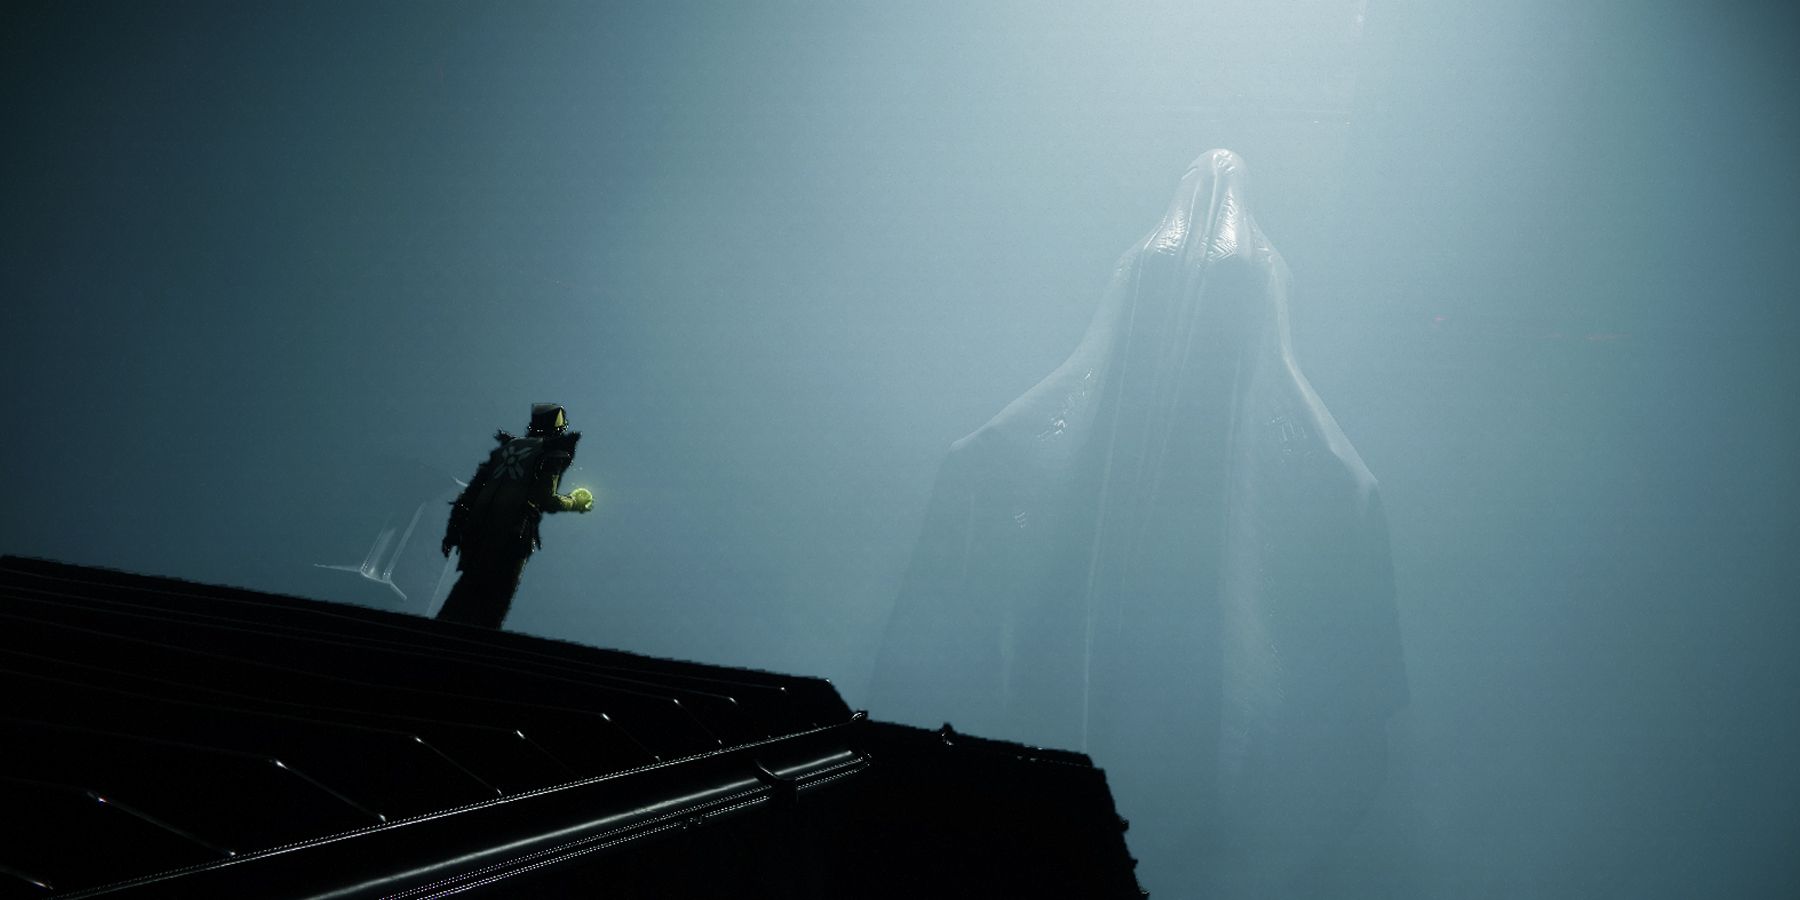 Eris Morn approaches a statue related to the Darkness in Destiny 2's Shadowkeep expansion.